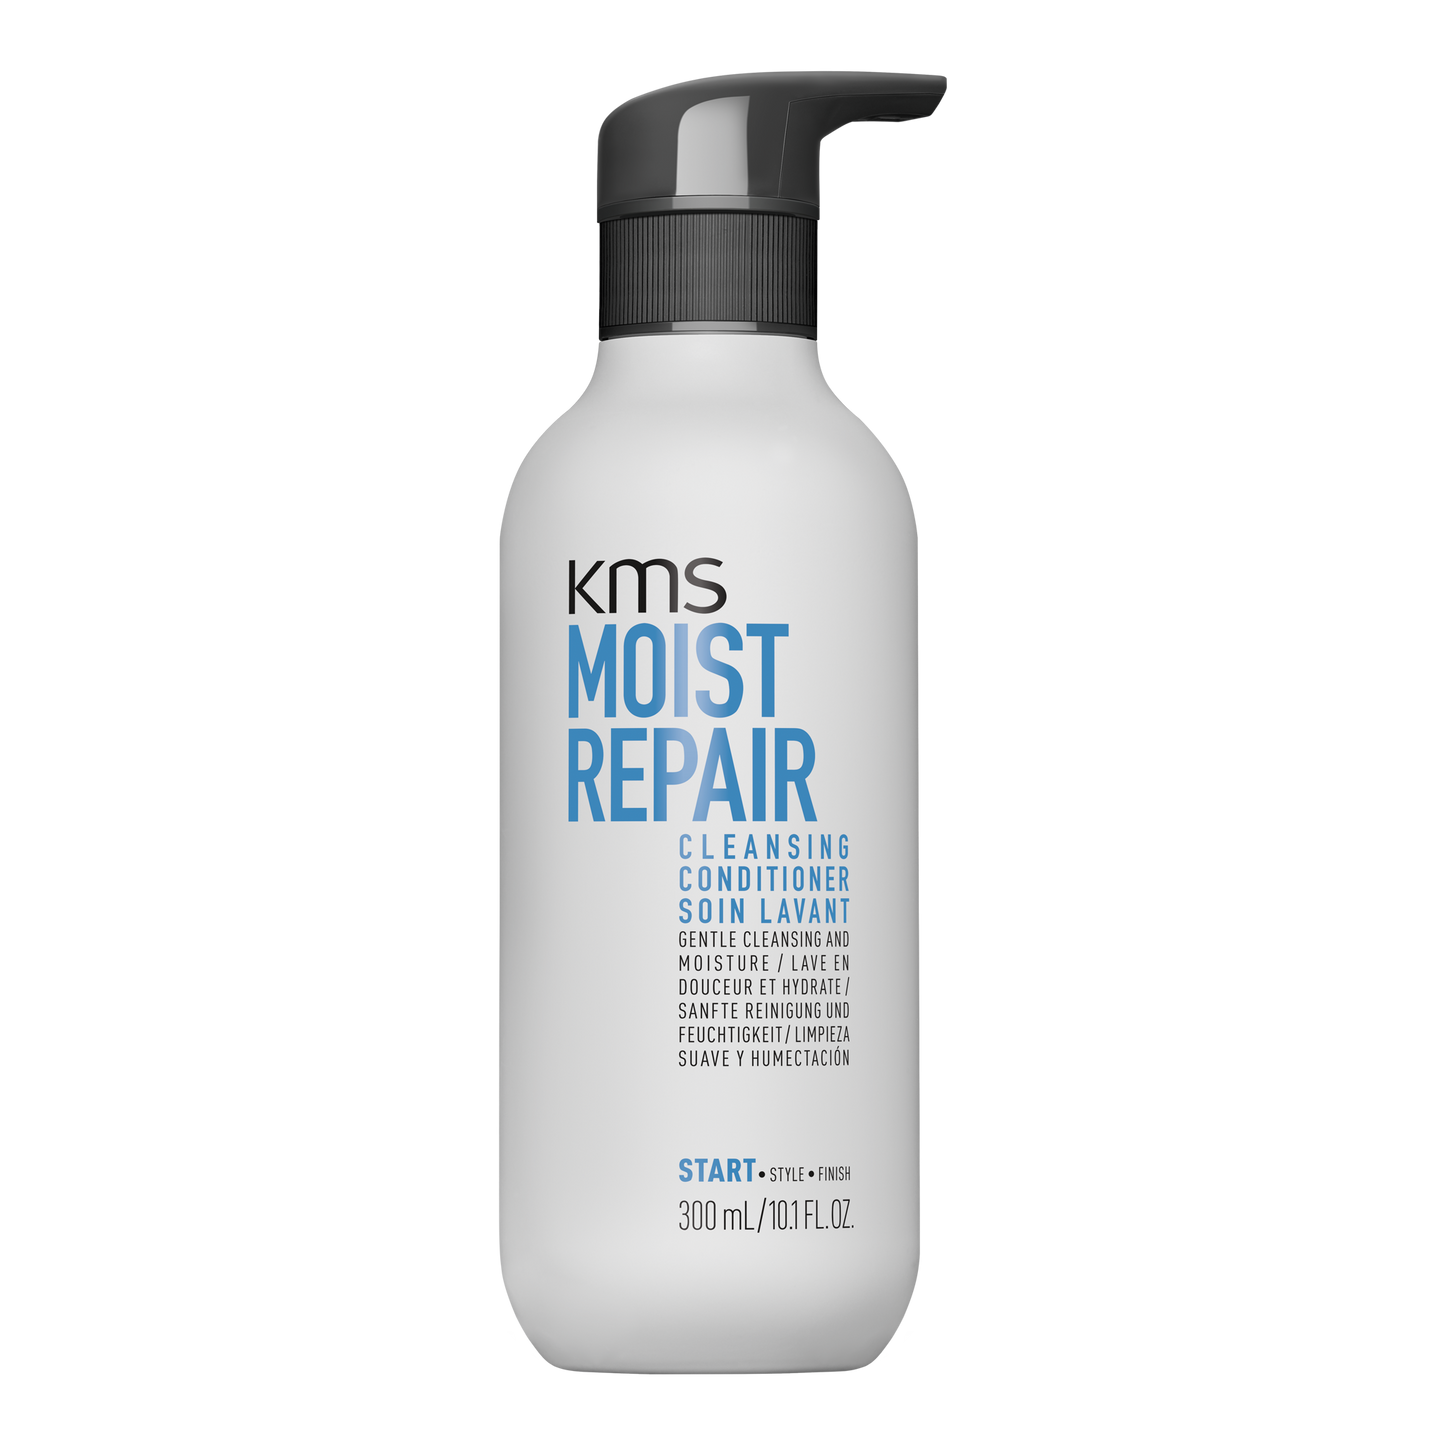 KMS MOISTREPAIR Cleansing Conditioner 300mL